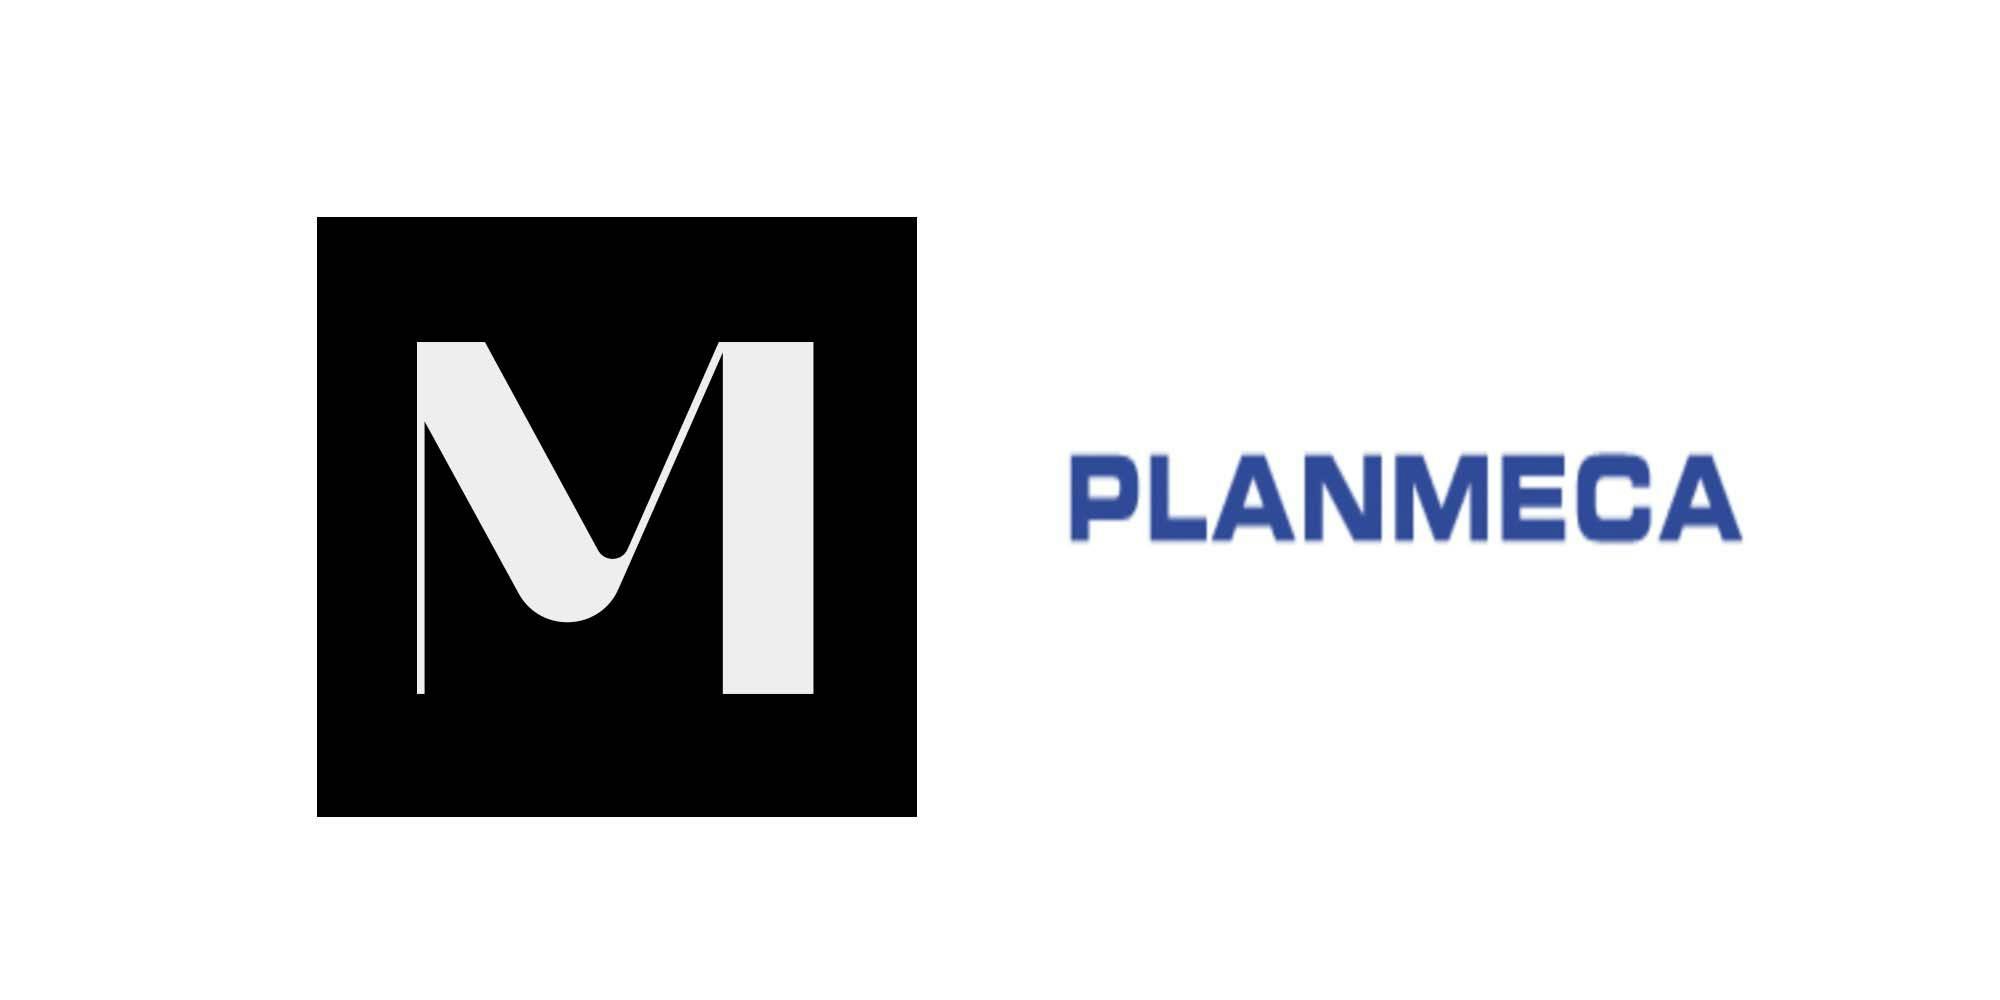 The MOD Institute and Planmeca logos